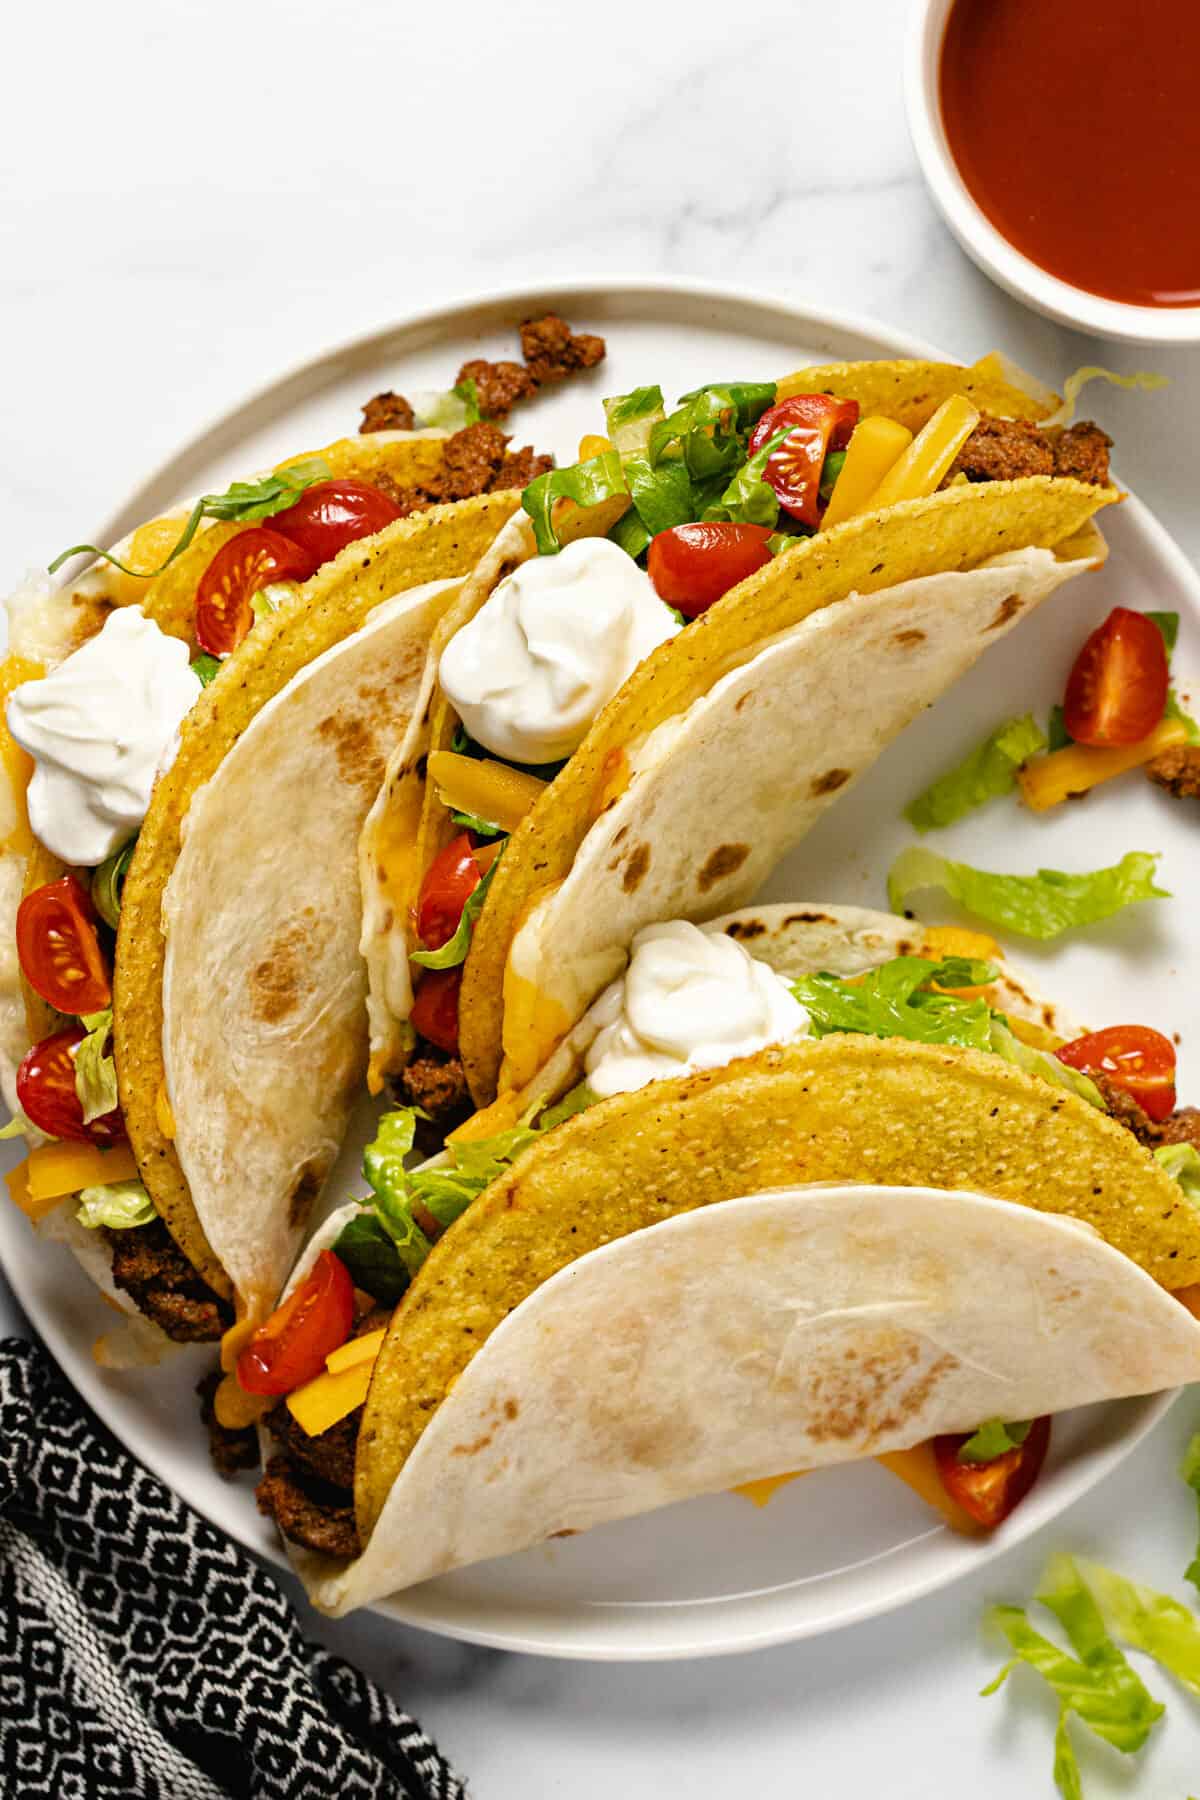 Three cheesy gordita crunch tacos on a white plate topped with sour cream